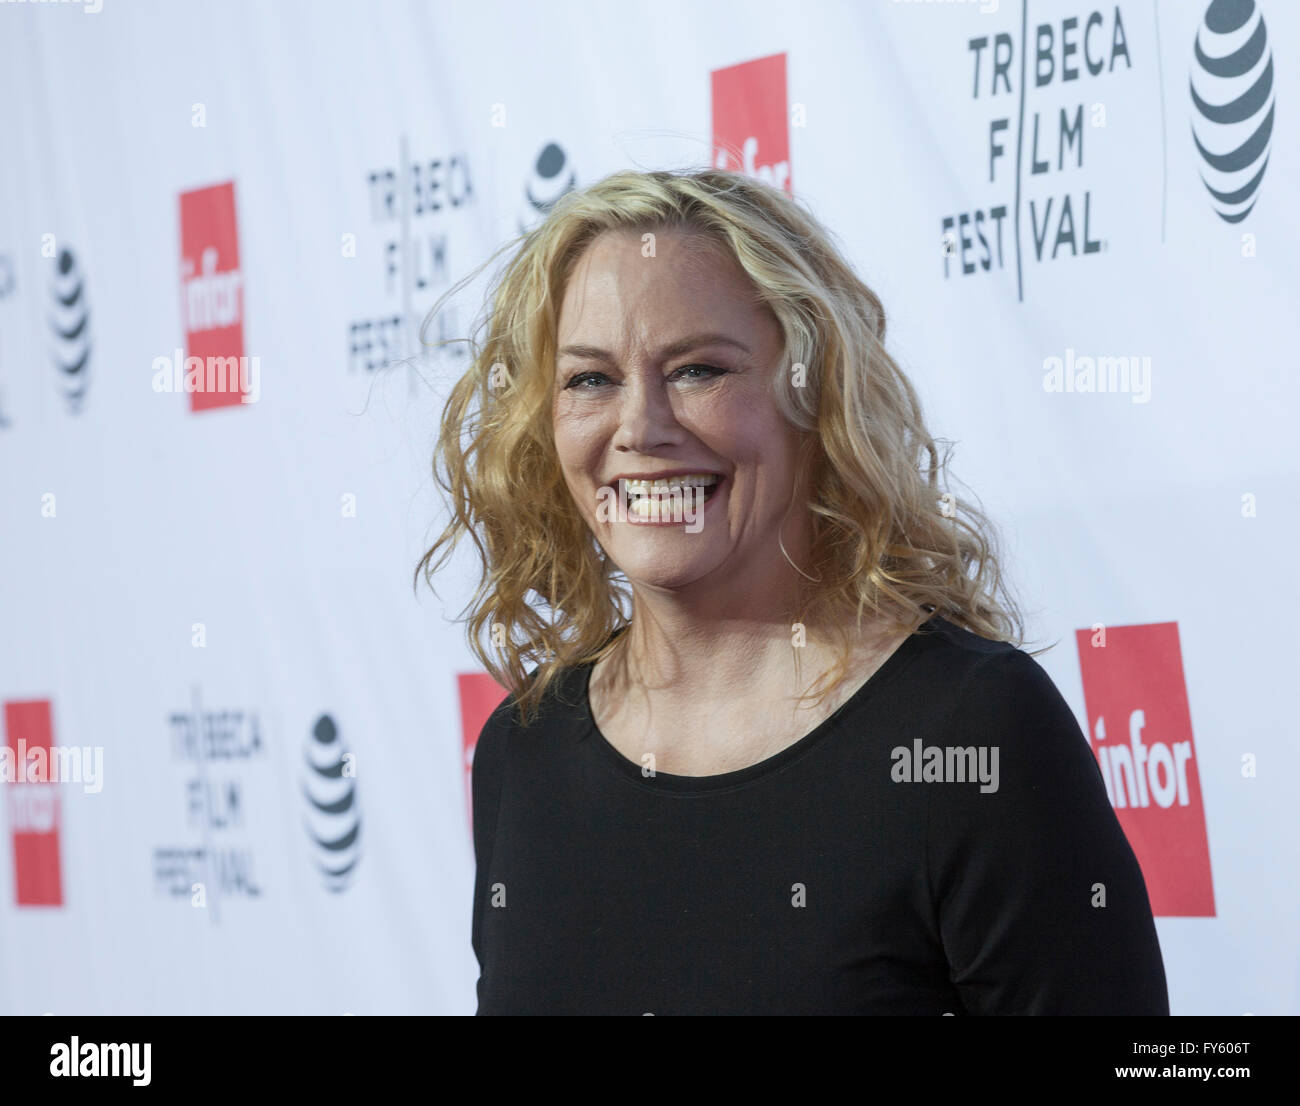 New York, USA. 22nd April, 2016. Cybill Shepherd attends 40th anniversary screening of Taxi Driver at Tribeca Film Festival Credit:  lev radin/Alamy Live News Stock Photo